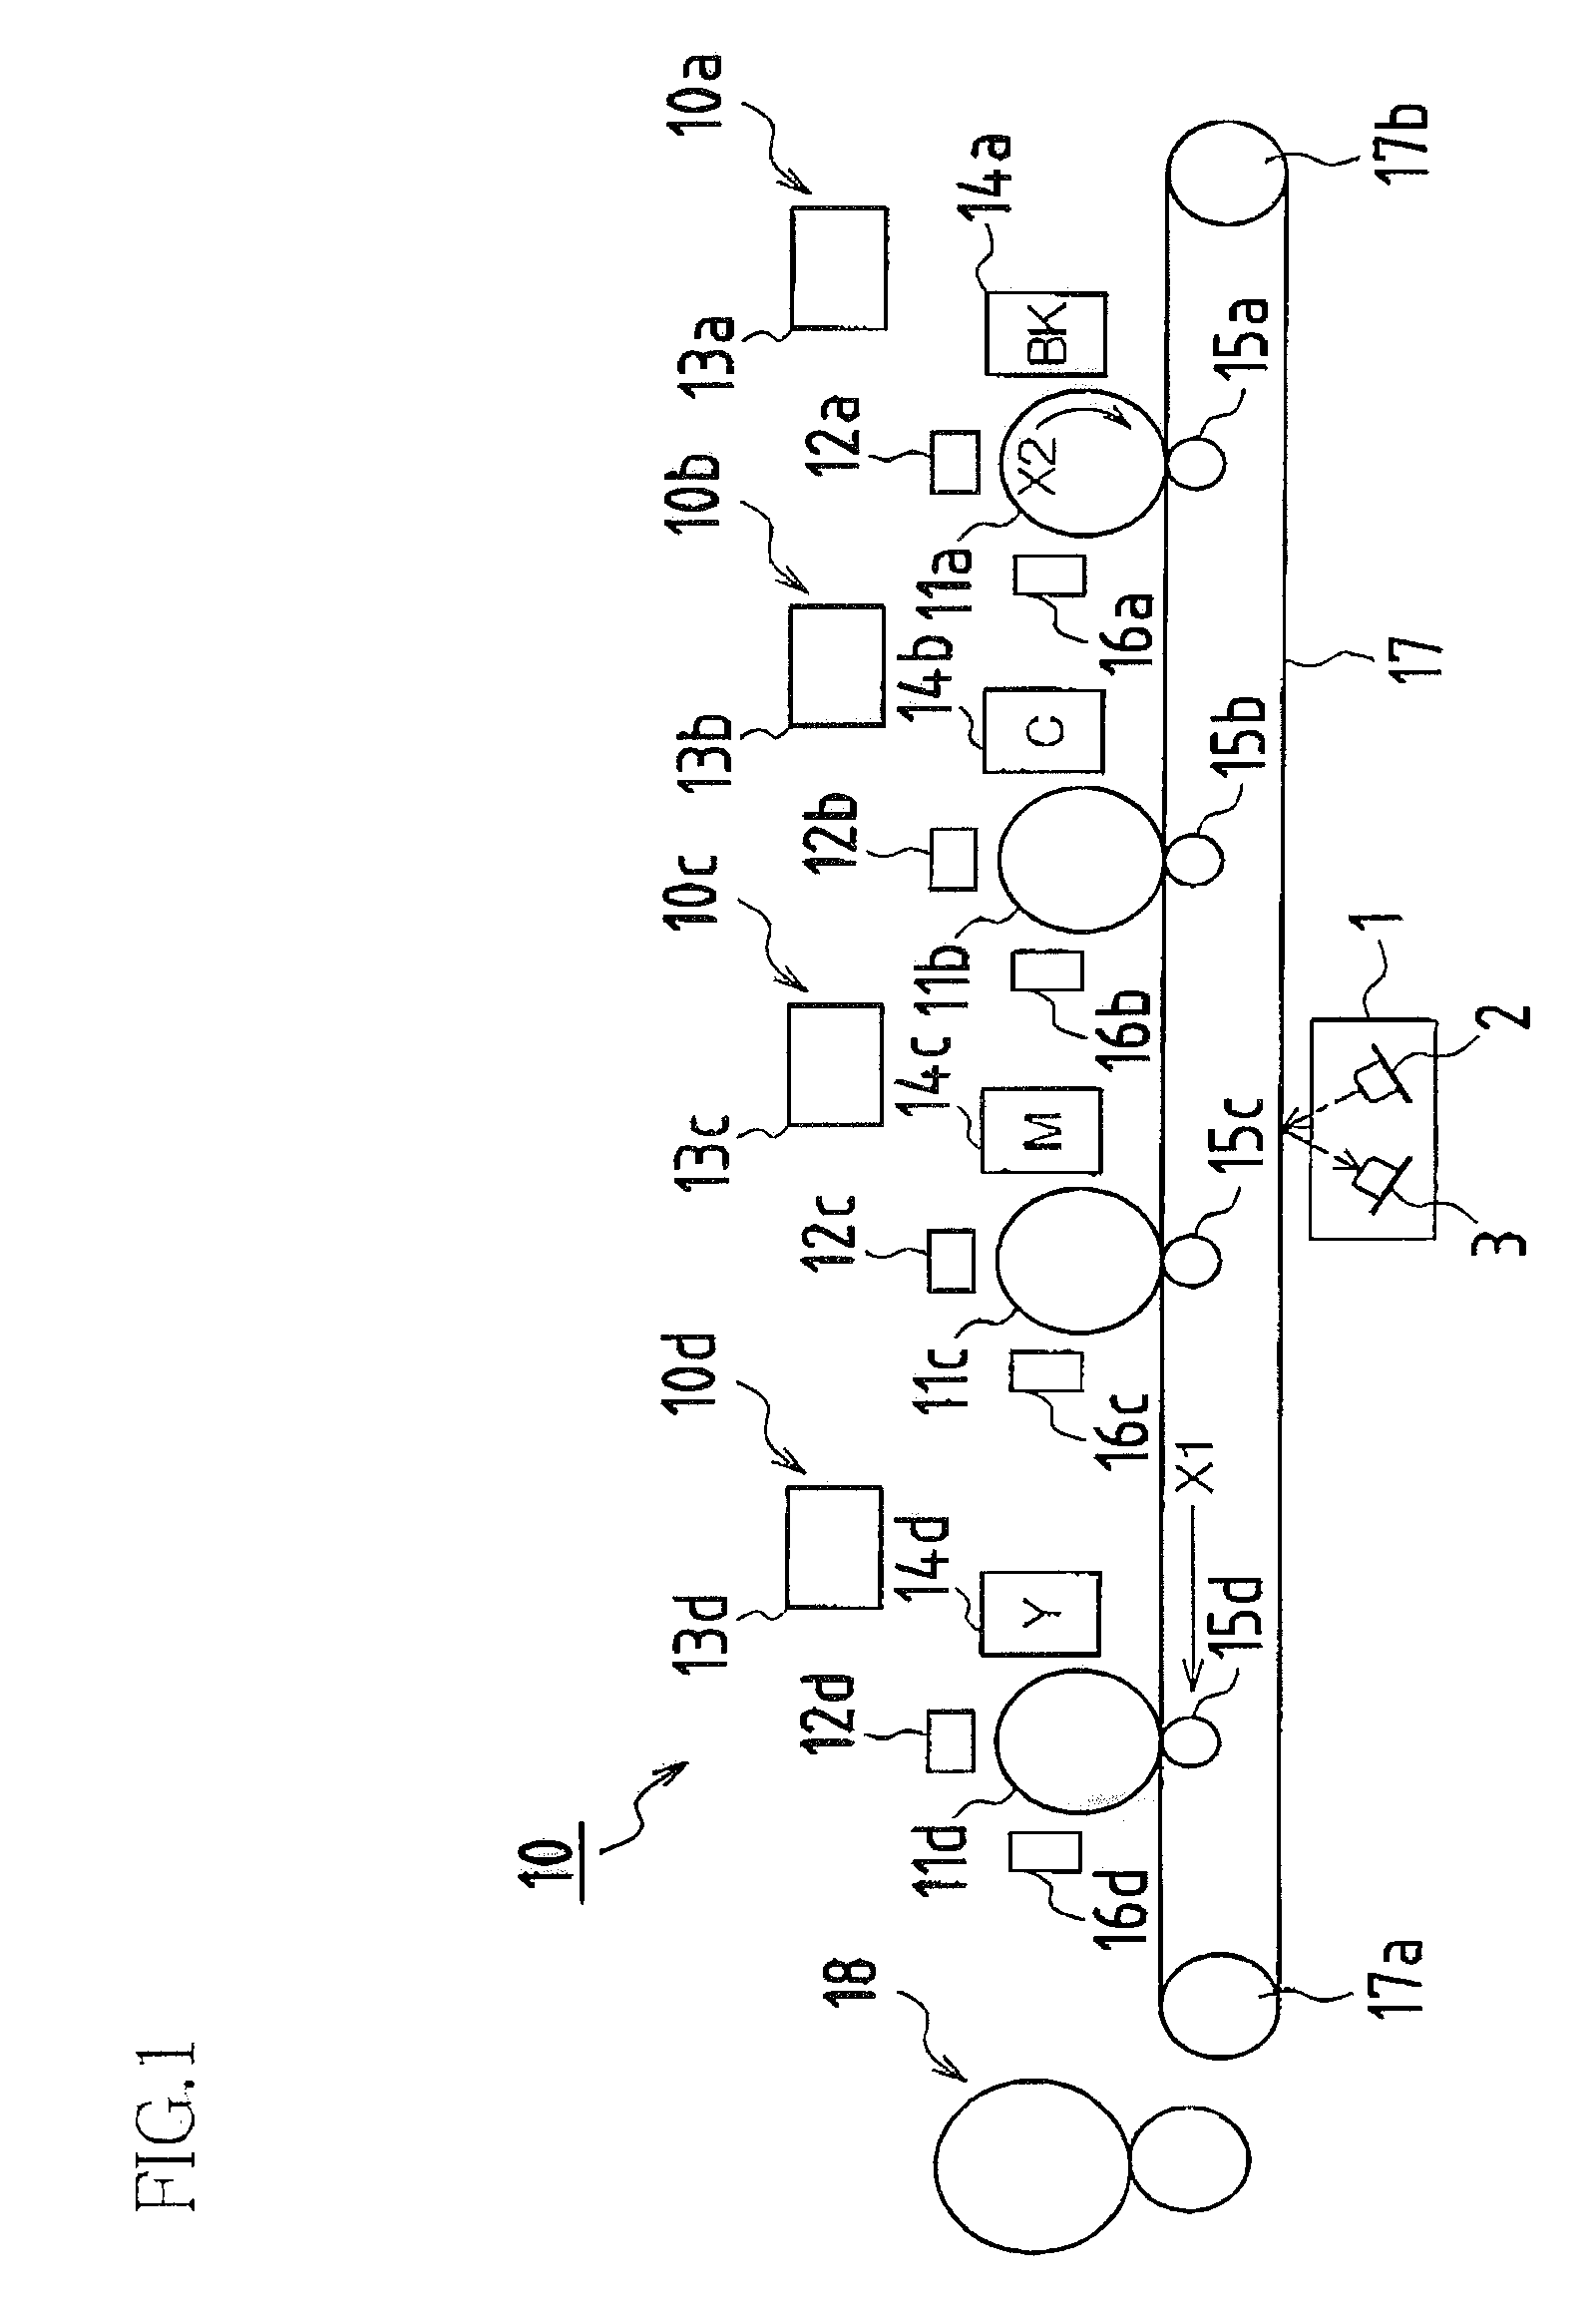 Image correction method and image forming apparatus